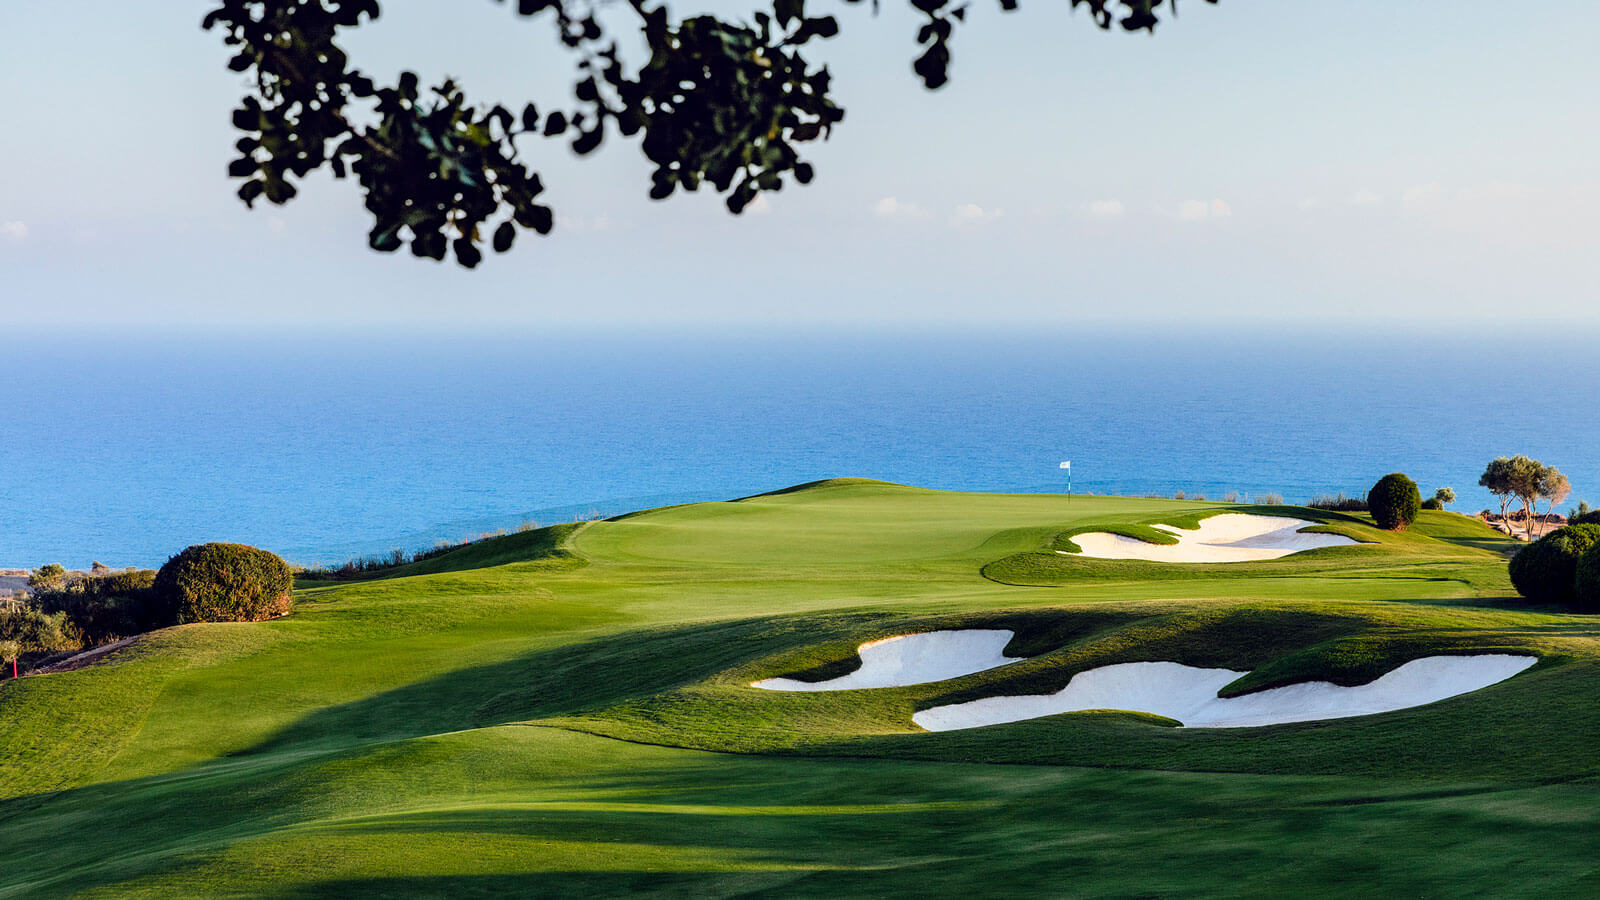 Of the worlds best golf courses to play before you die â